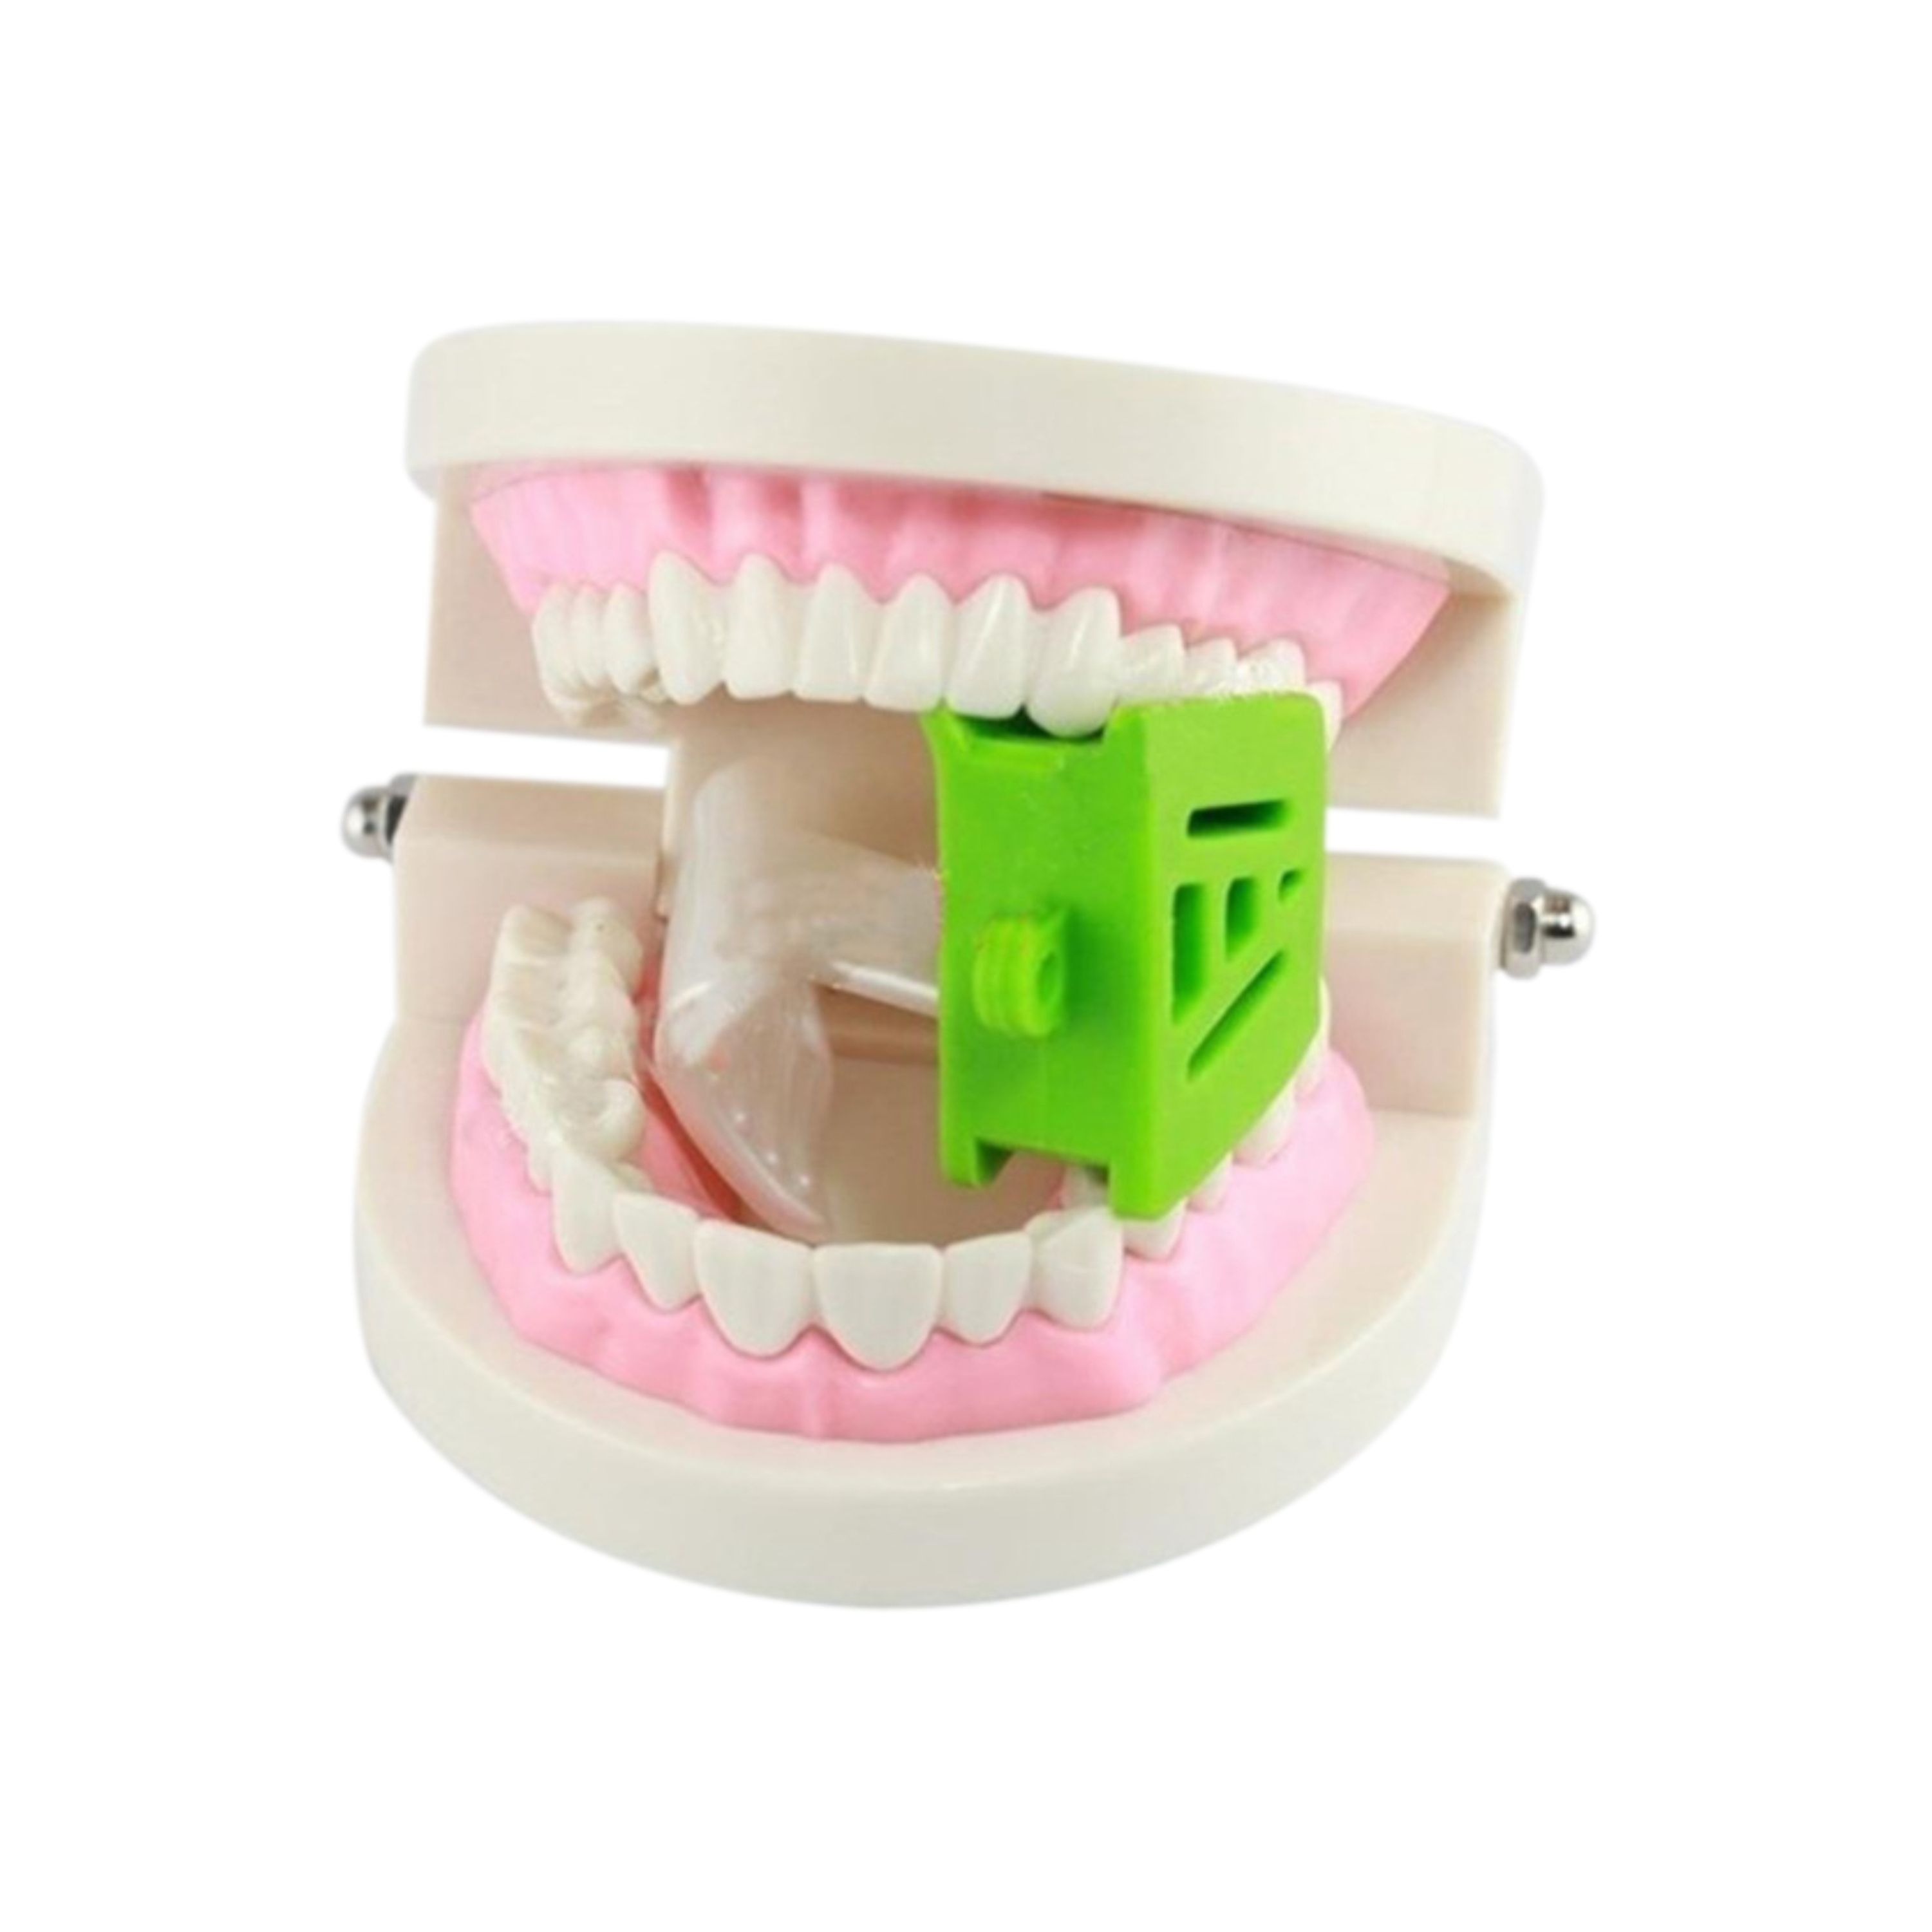 Trust & Care Mouth Prop Small